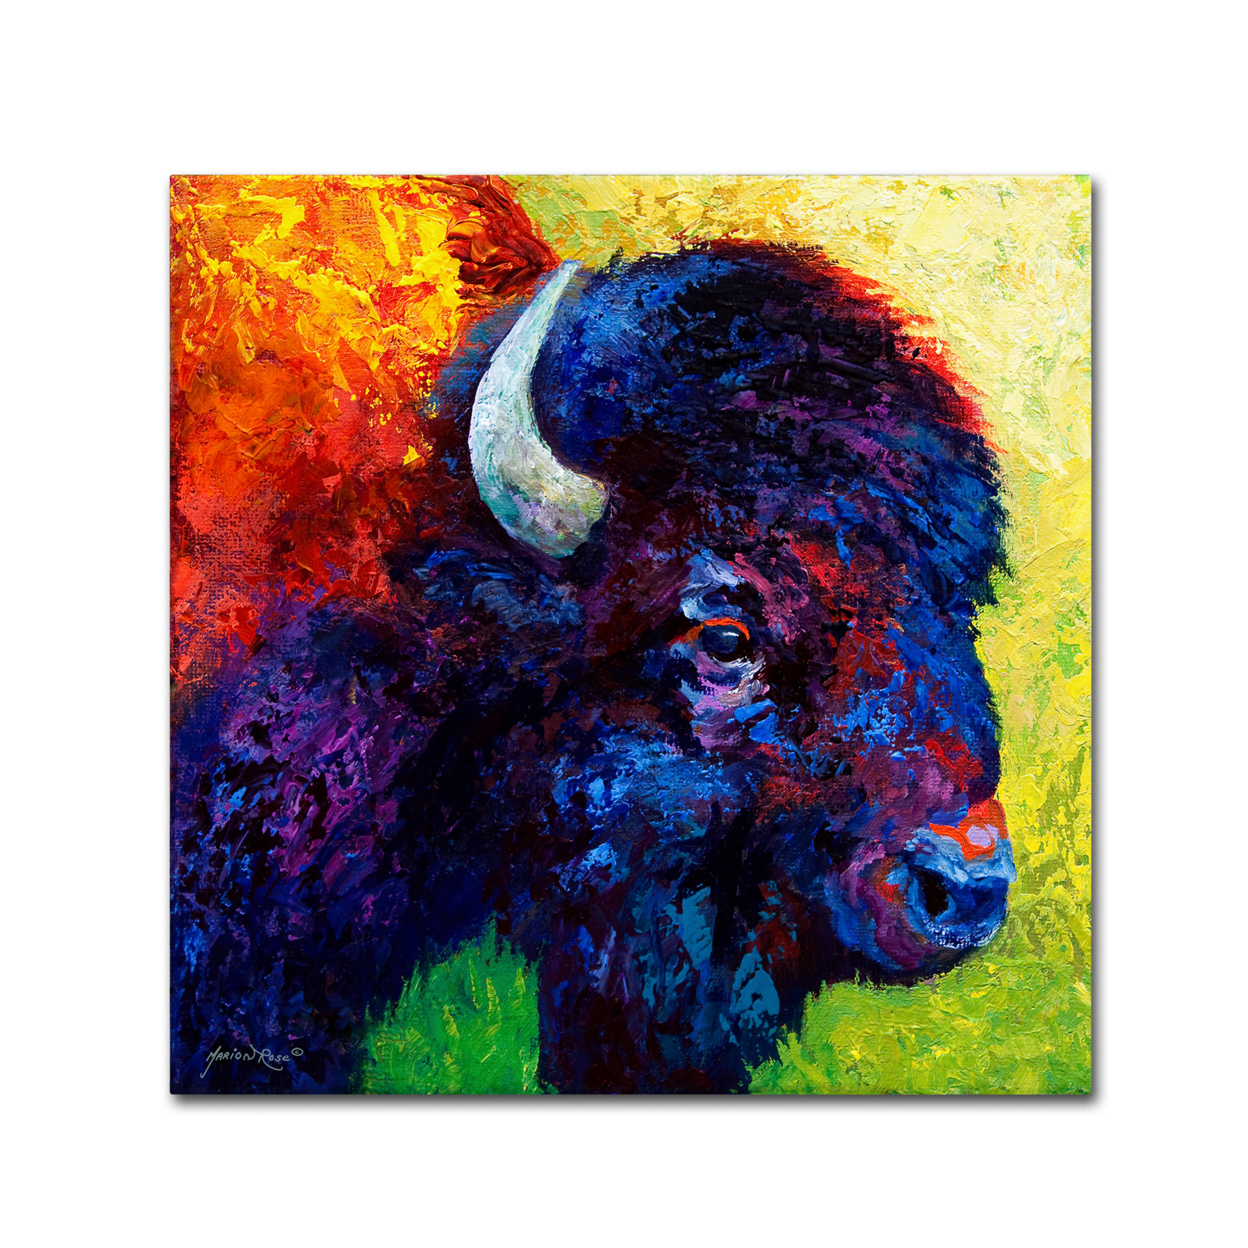 Marion Rose 'Bison Head III' Ready To Hang Canvas Art 24 X 24 Inches Made In USA